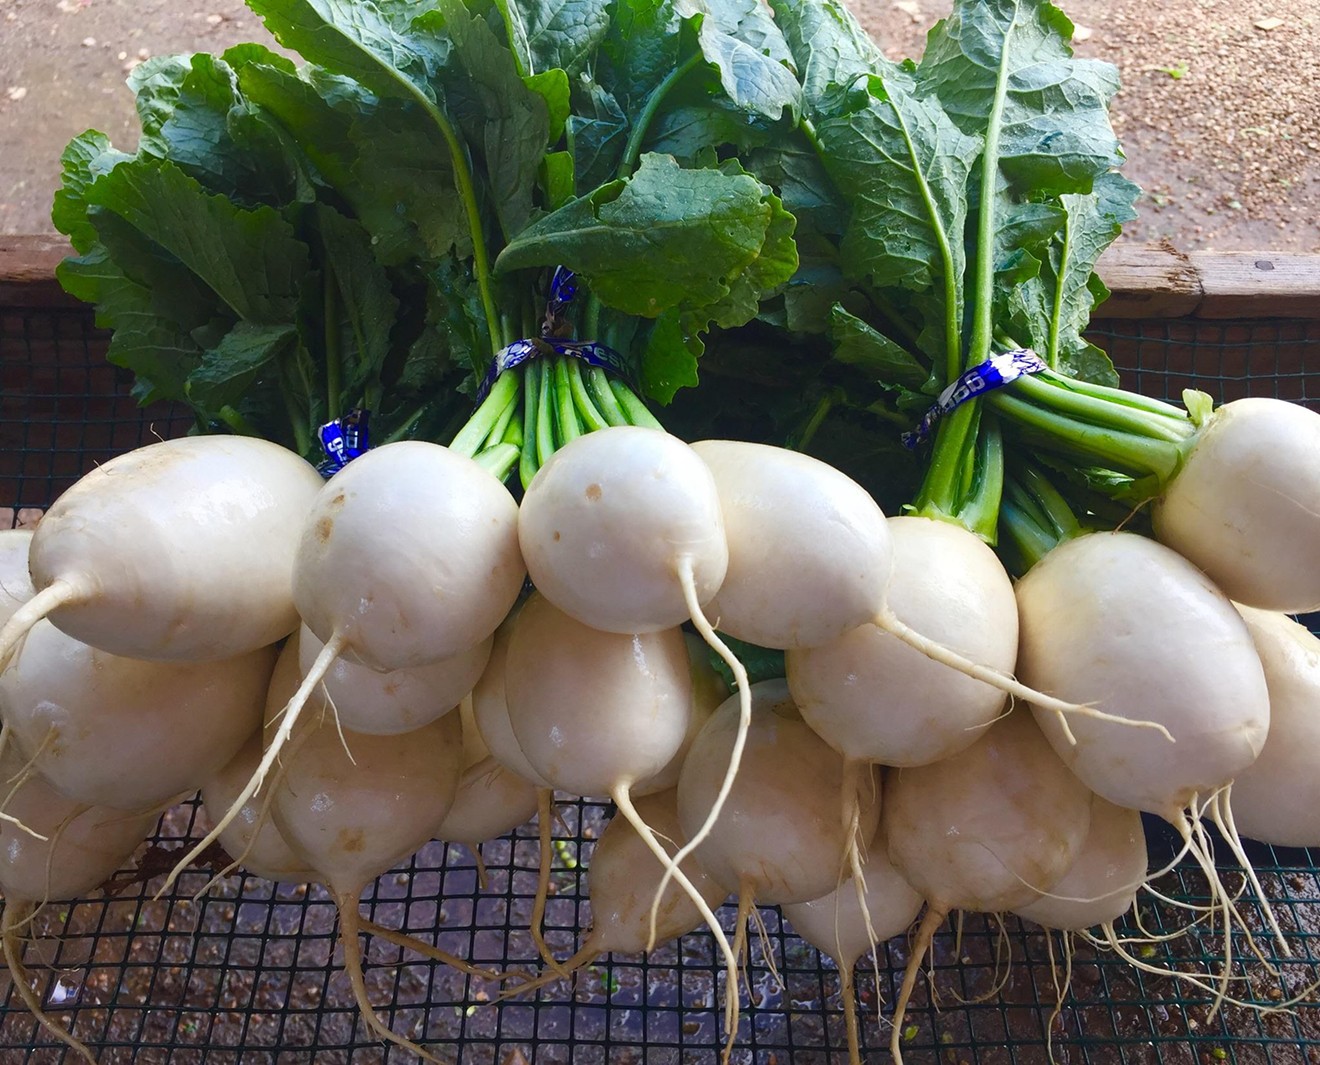 These are definitely not your grandparents’ turnips.